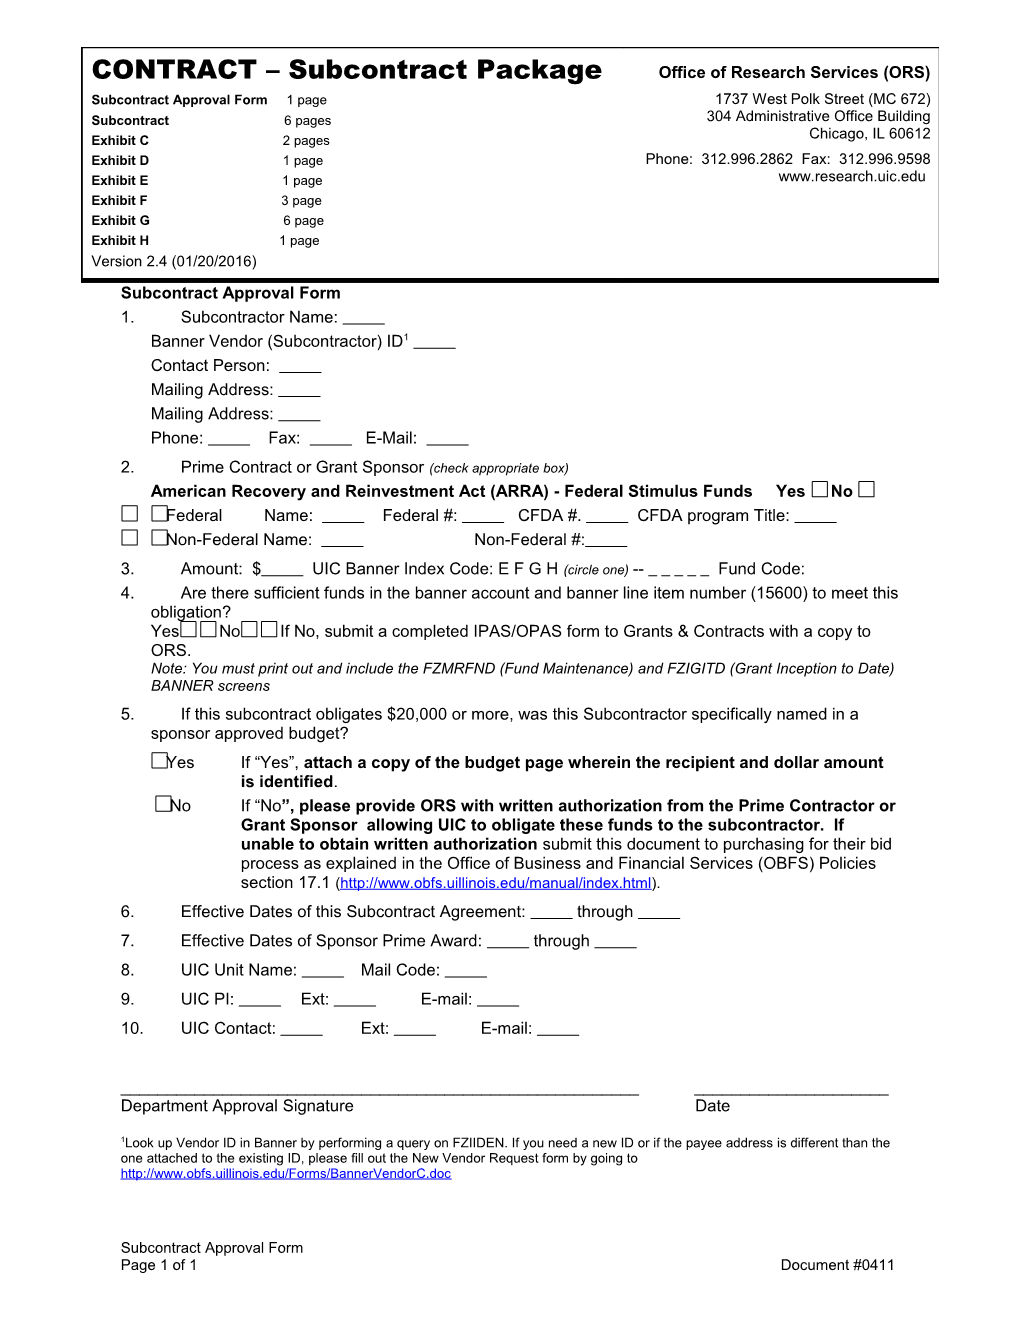 Subcontract Approval Form